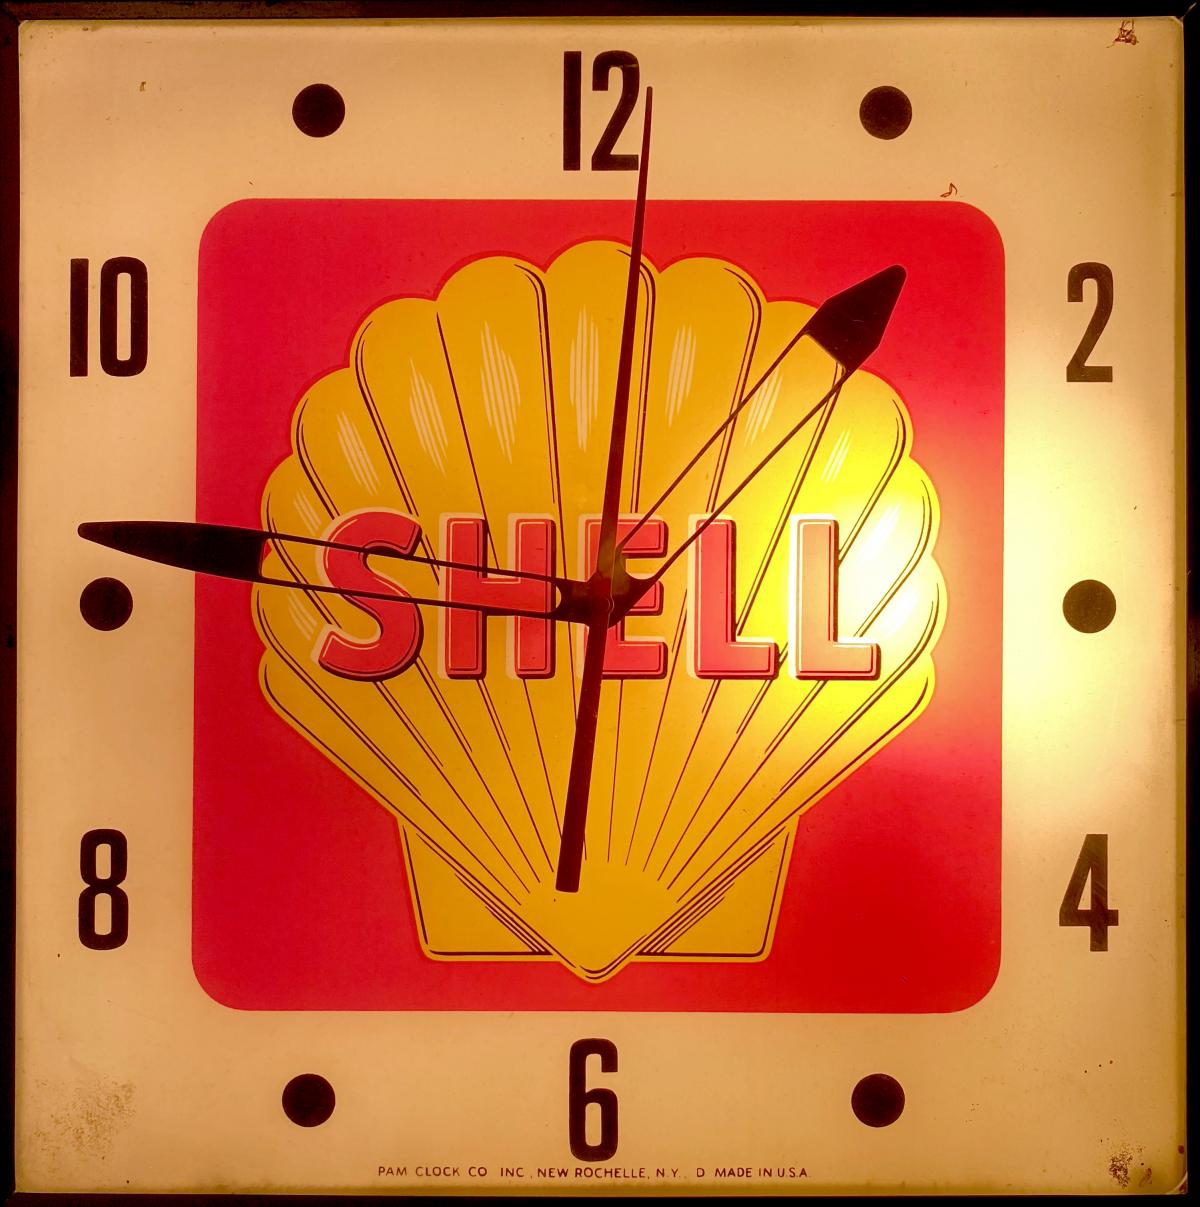 A SHELL GASOLINE LIGHTED ADVERTISING CLOCK